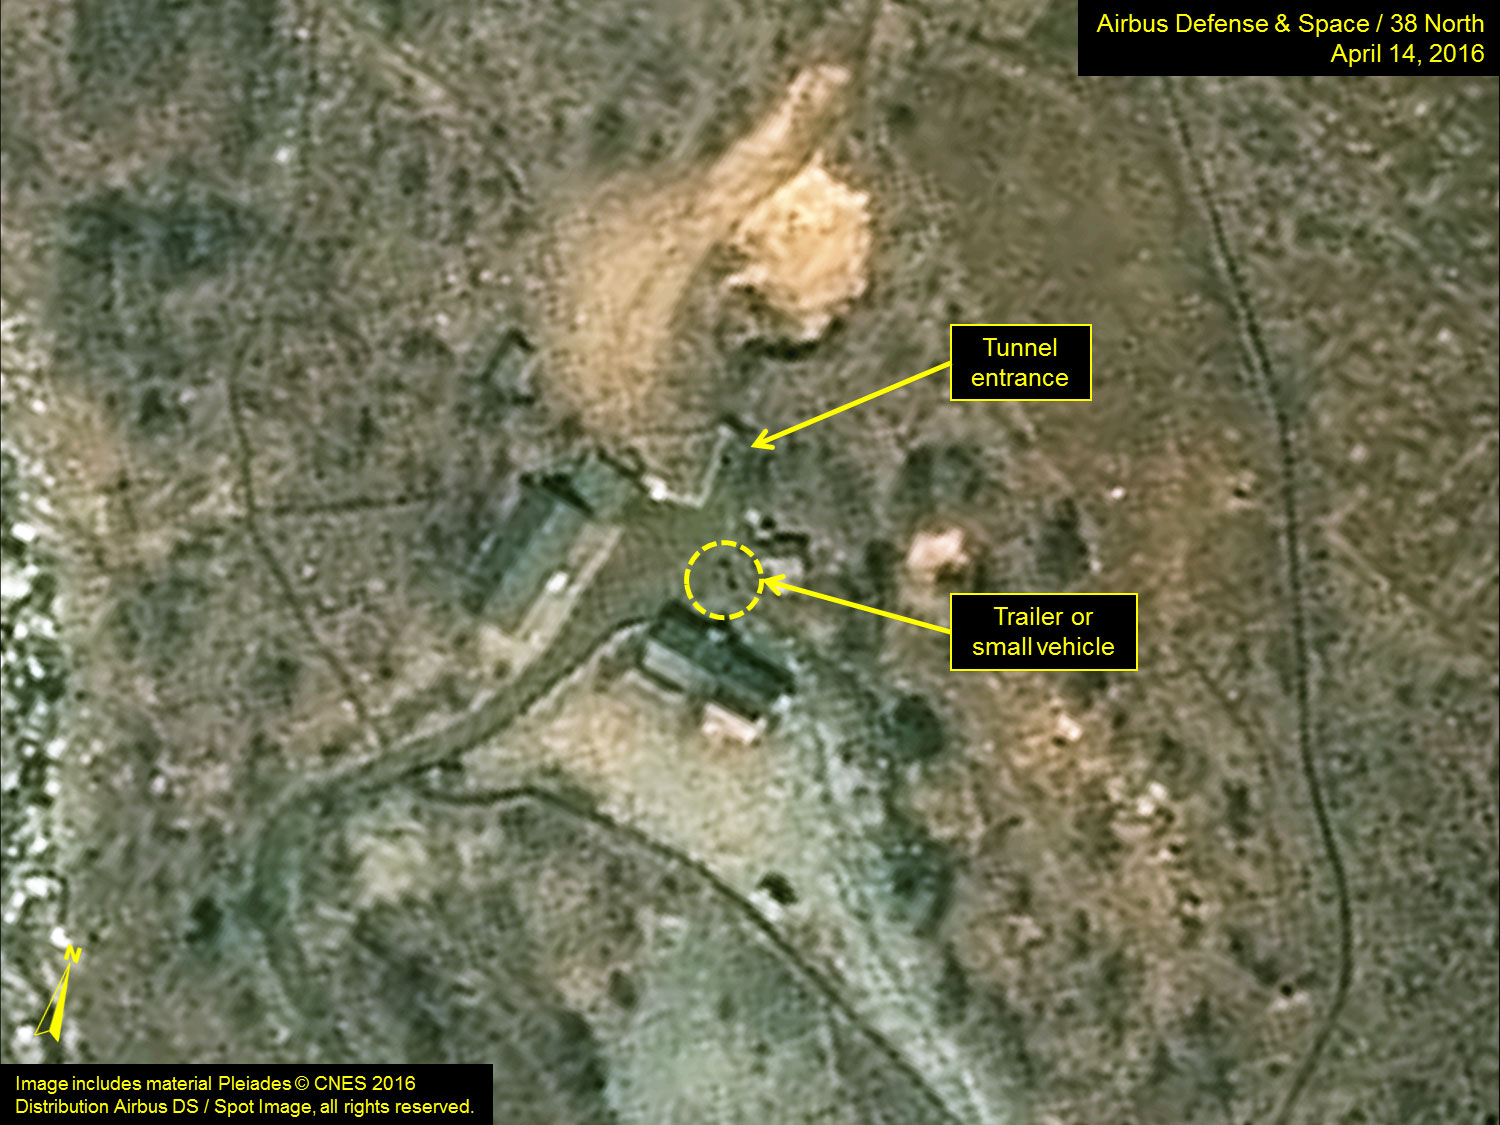 Punggye-ri Nuclear Test Site: Limited Activity Continues